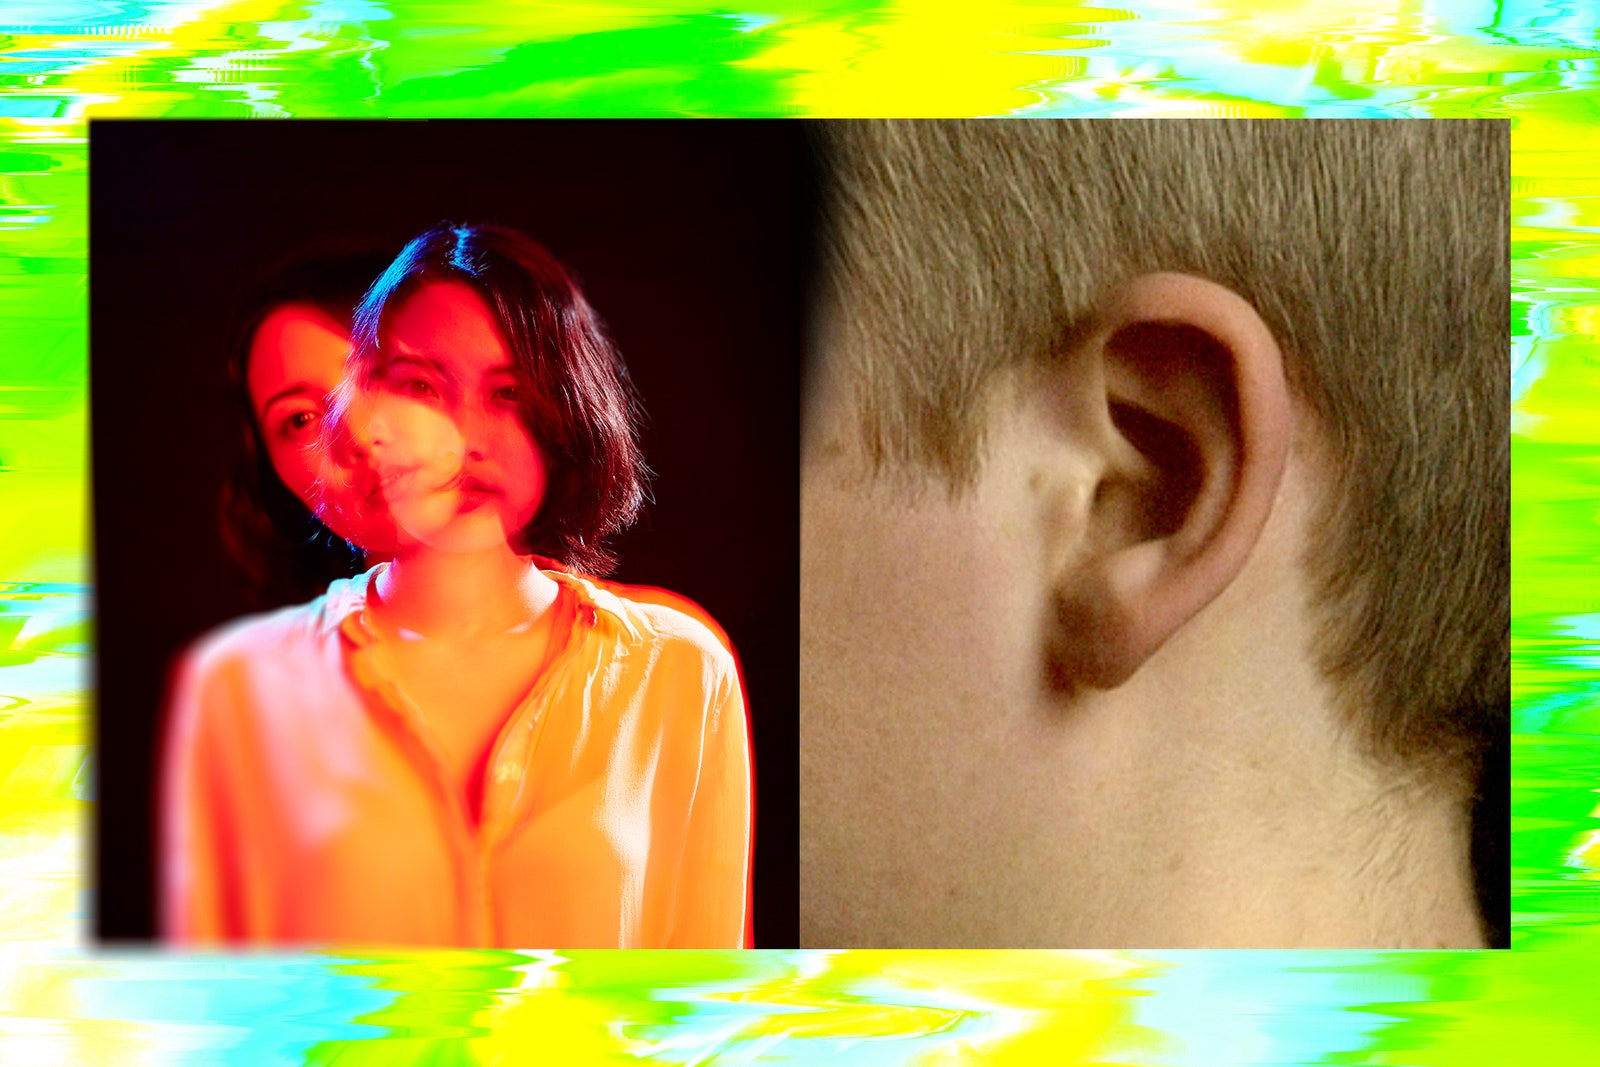 Collage of a double exposure portrait a video of a person's ear morphing from young to old and a glitchy texture